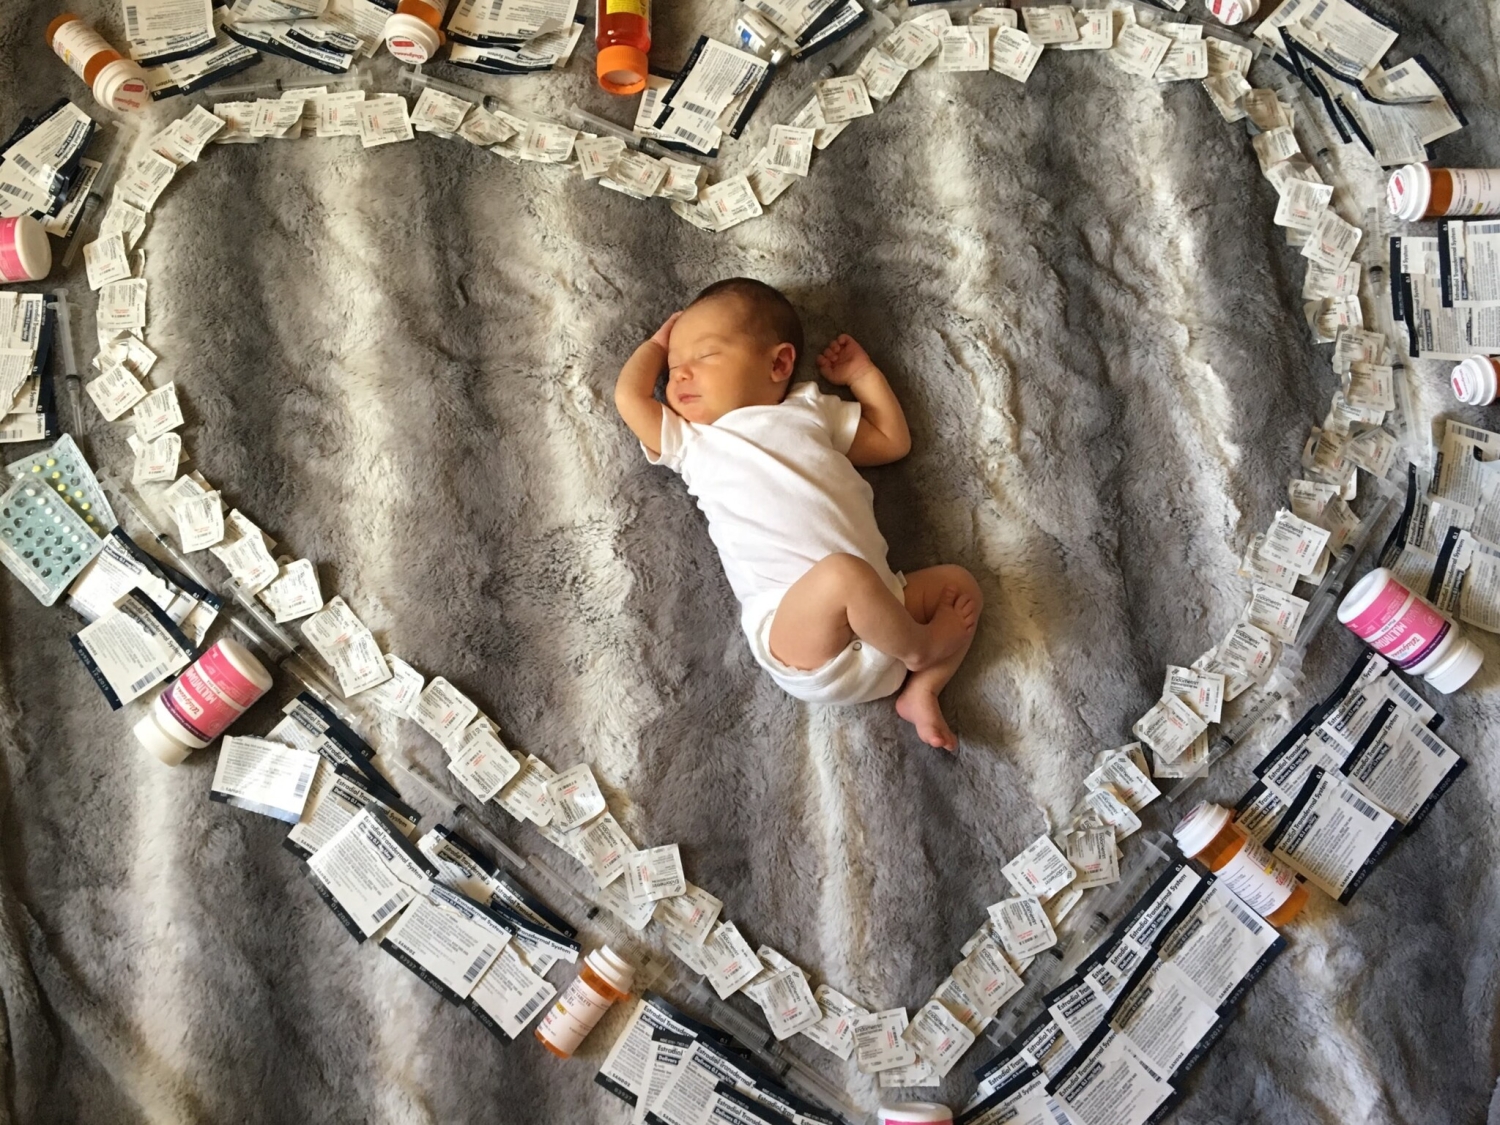 Baby lying on floor surrounded by IVF medical supplies